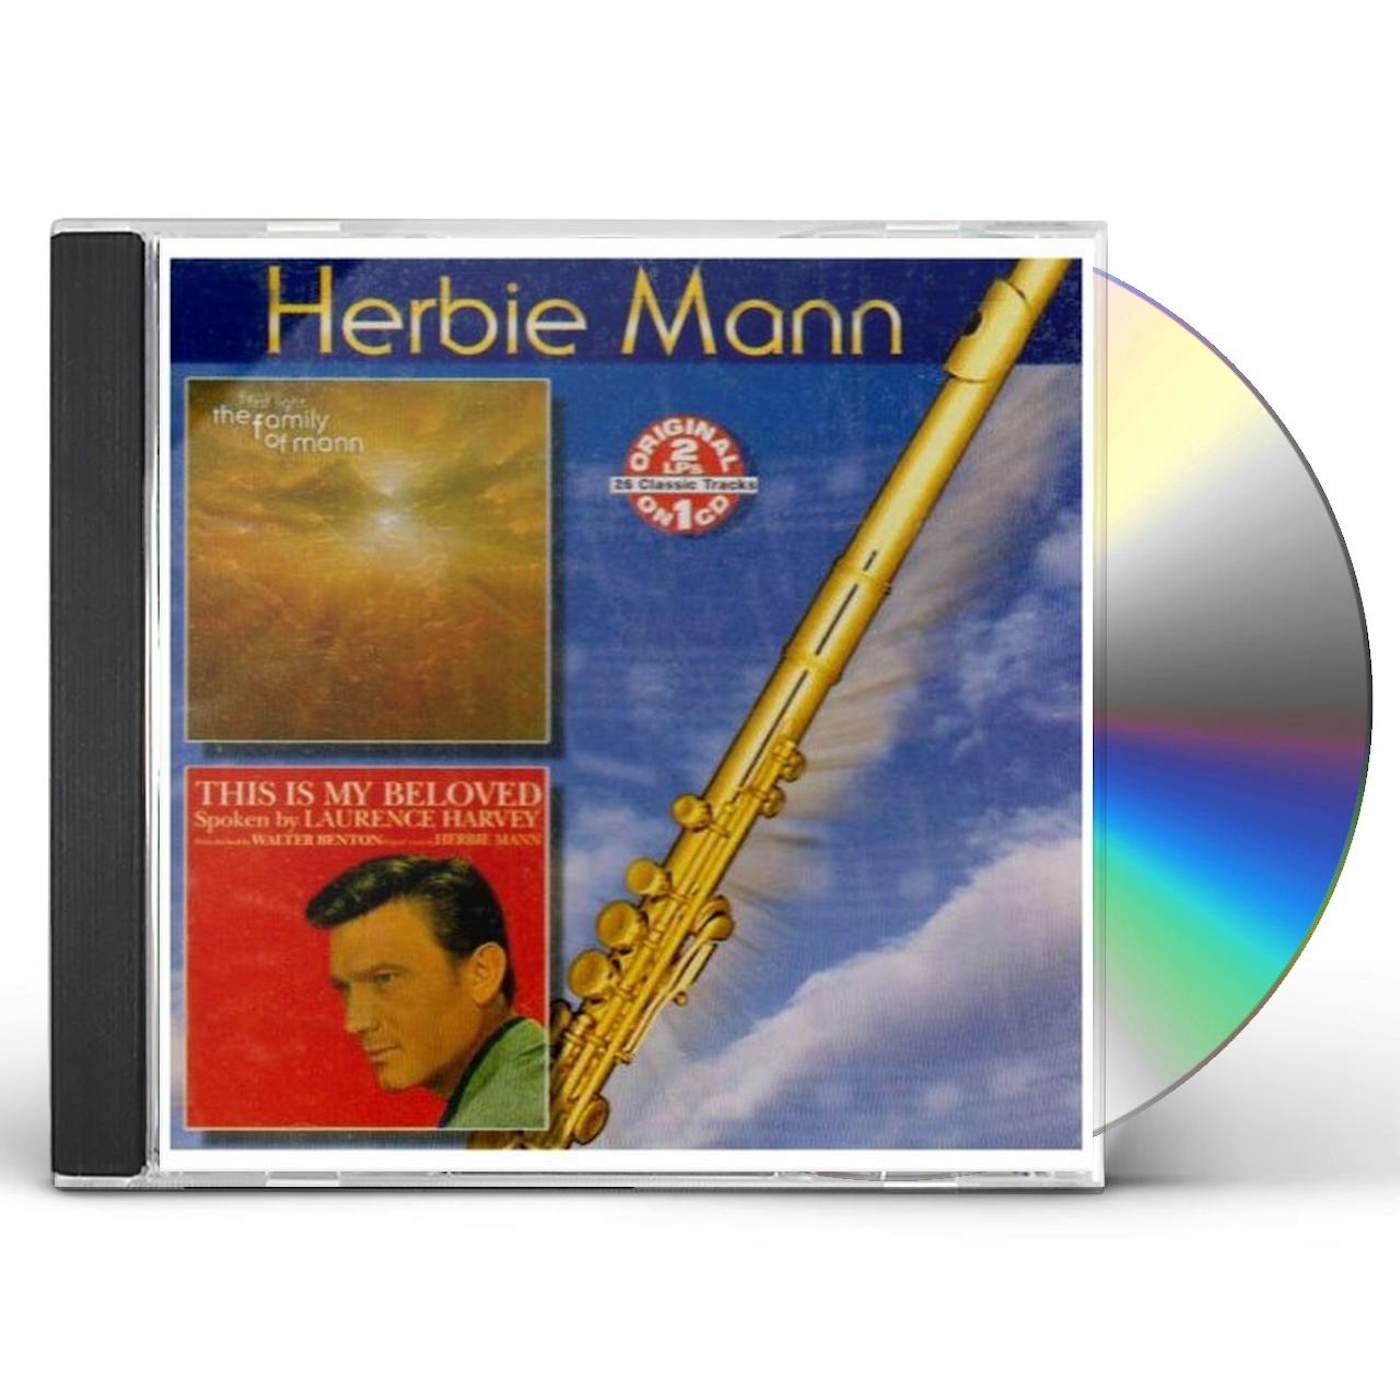 Herbie Mann FAMILY OF MANN: FIRST LIGHT / THIS IS MY BELOVED CD